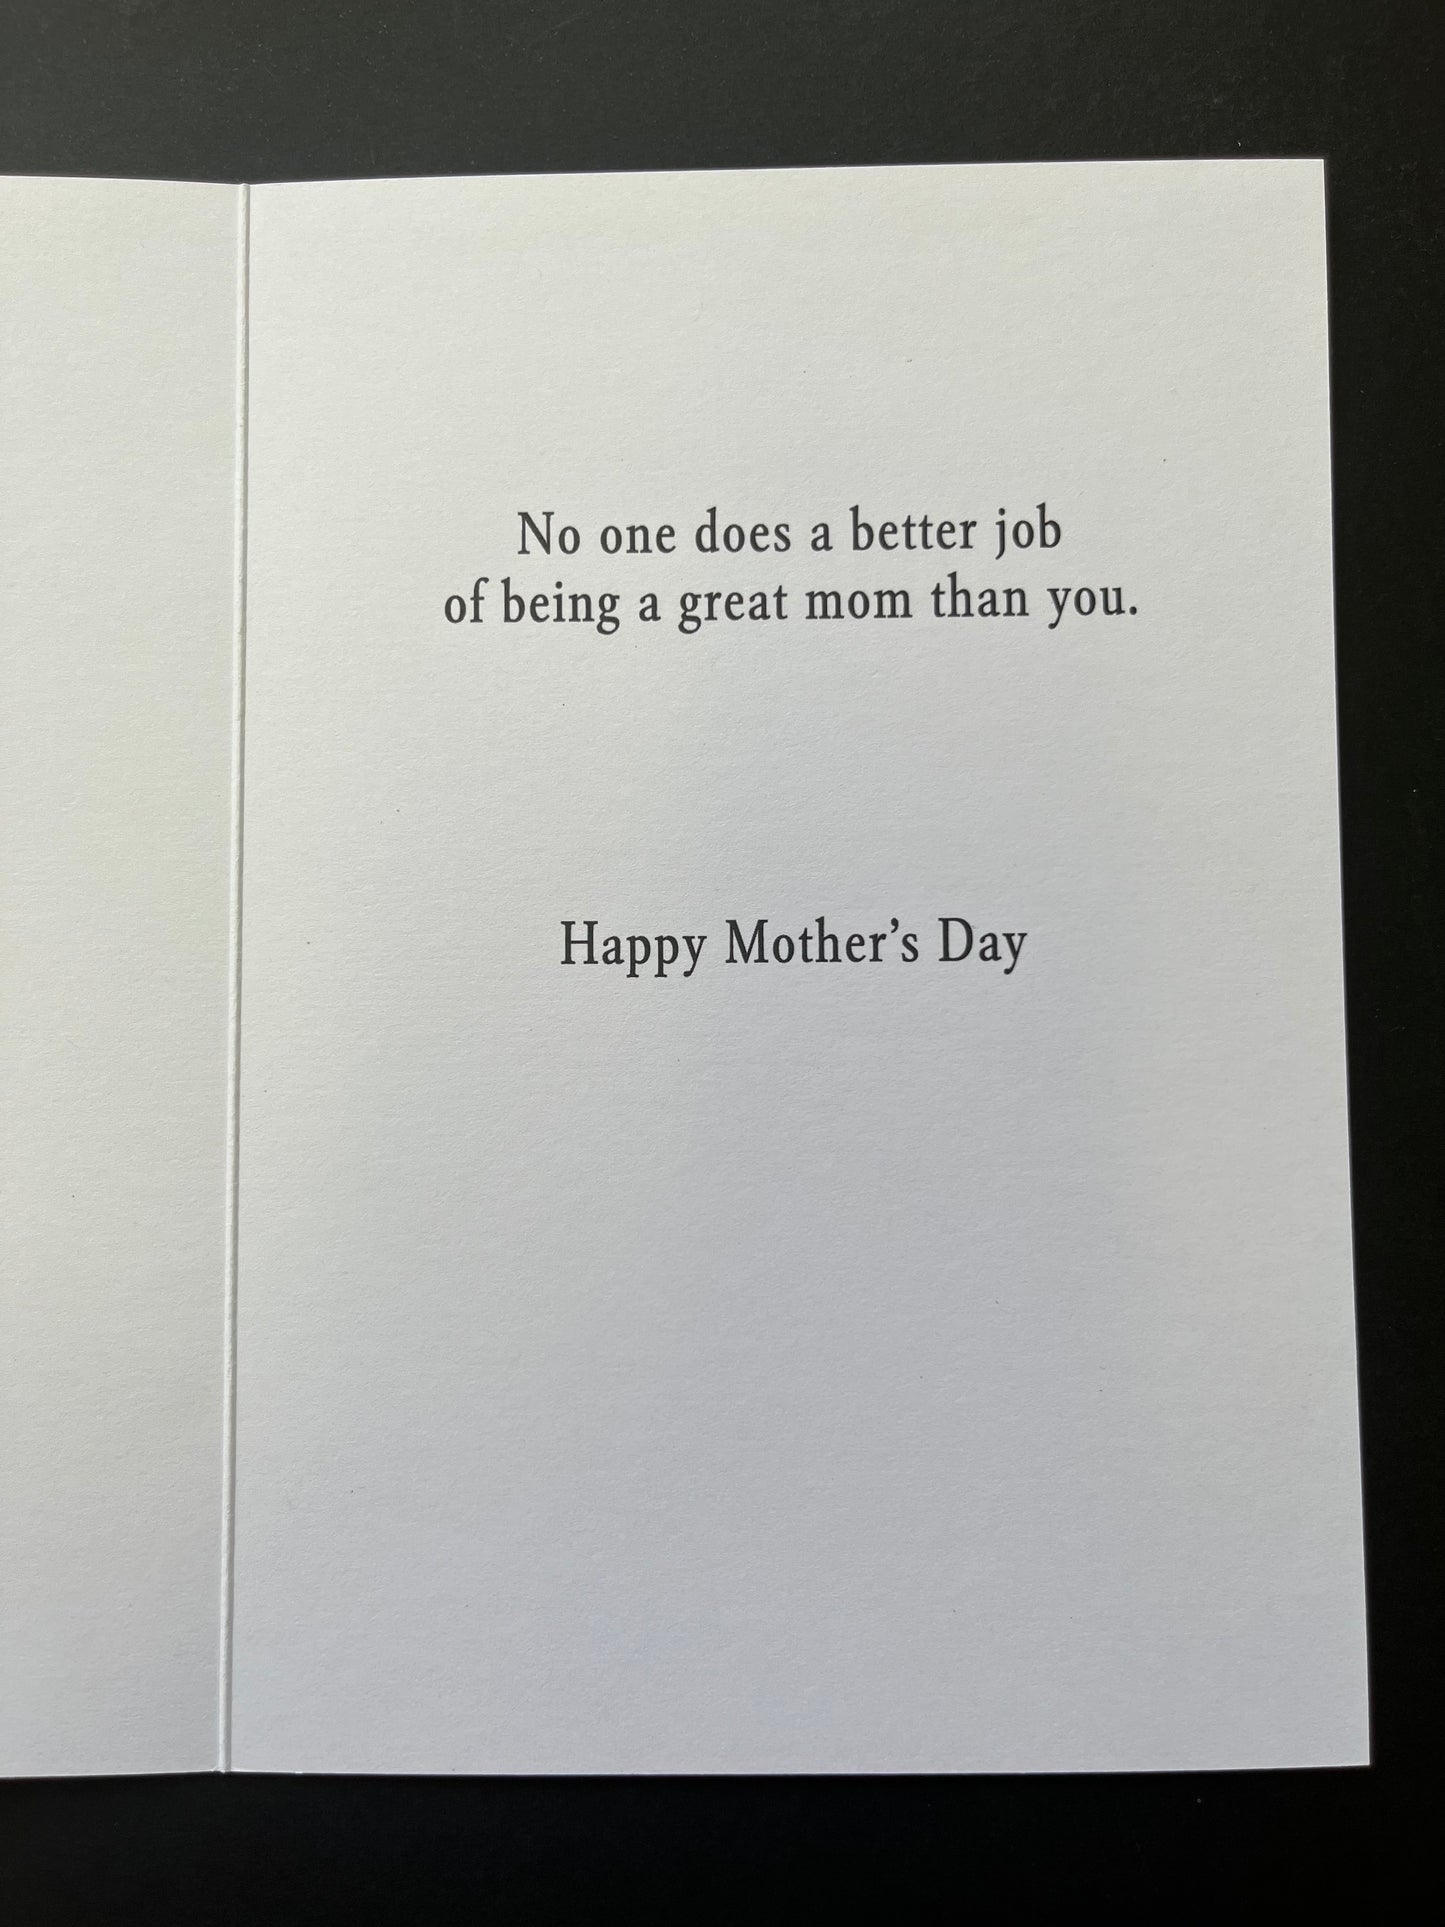 Applied for Position - Mother's Day Card